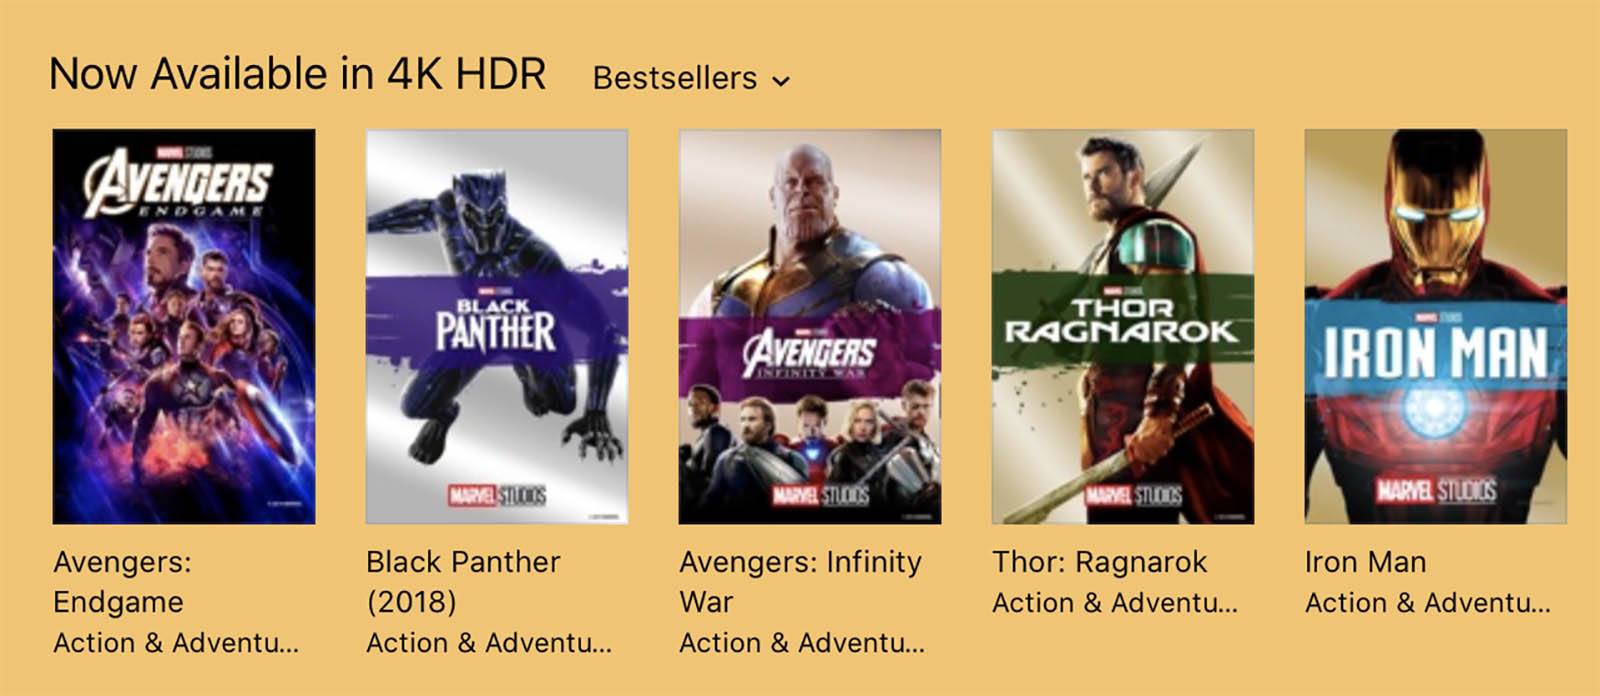 Apple TV, iTunes Add 4K HDR Support for Disney Movies